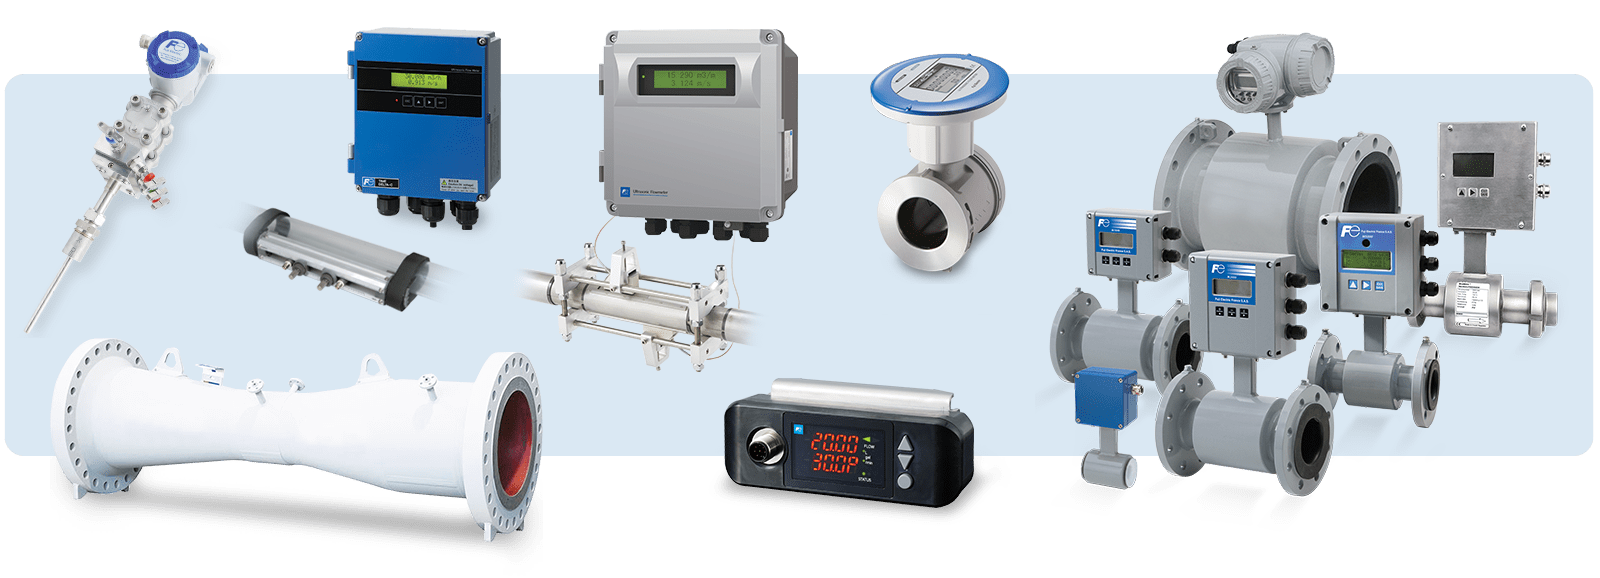 Improve your industrial processes with the ideal flow meter!